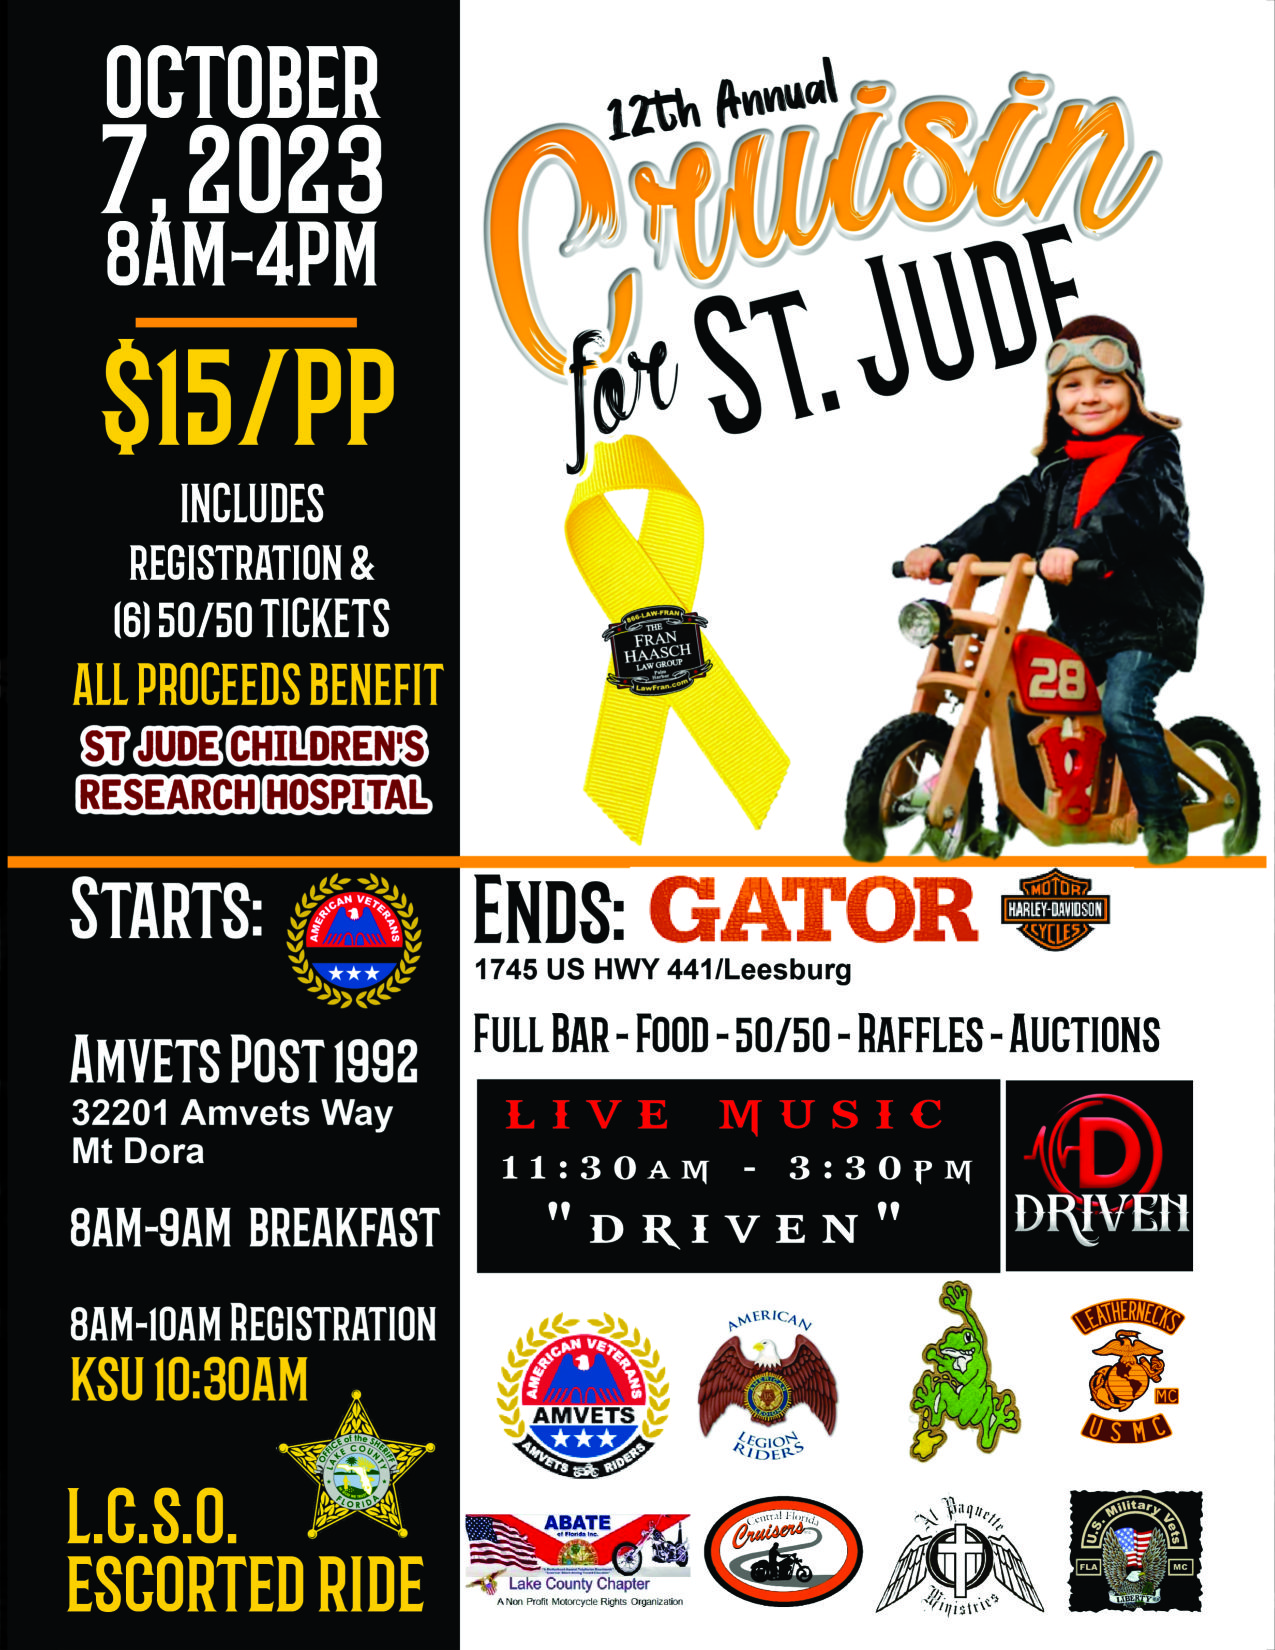 Ride for St Jude's